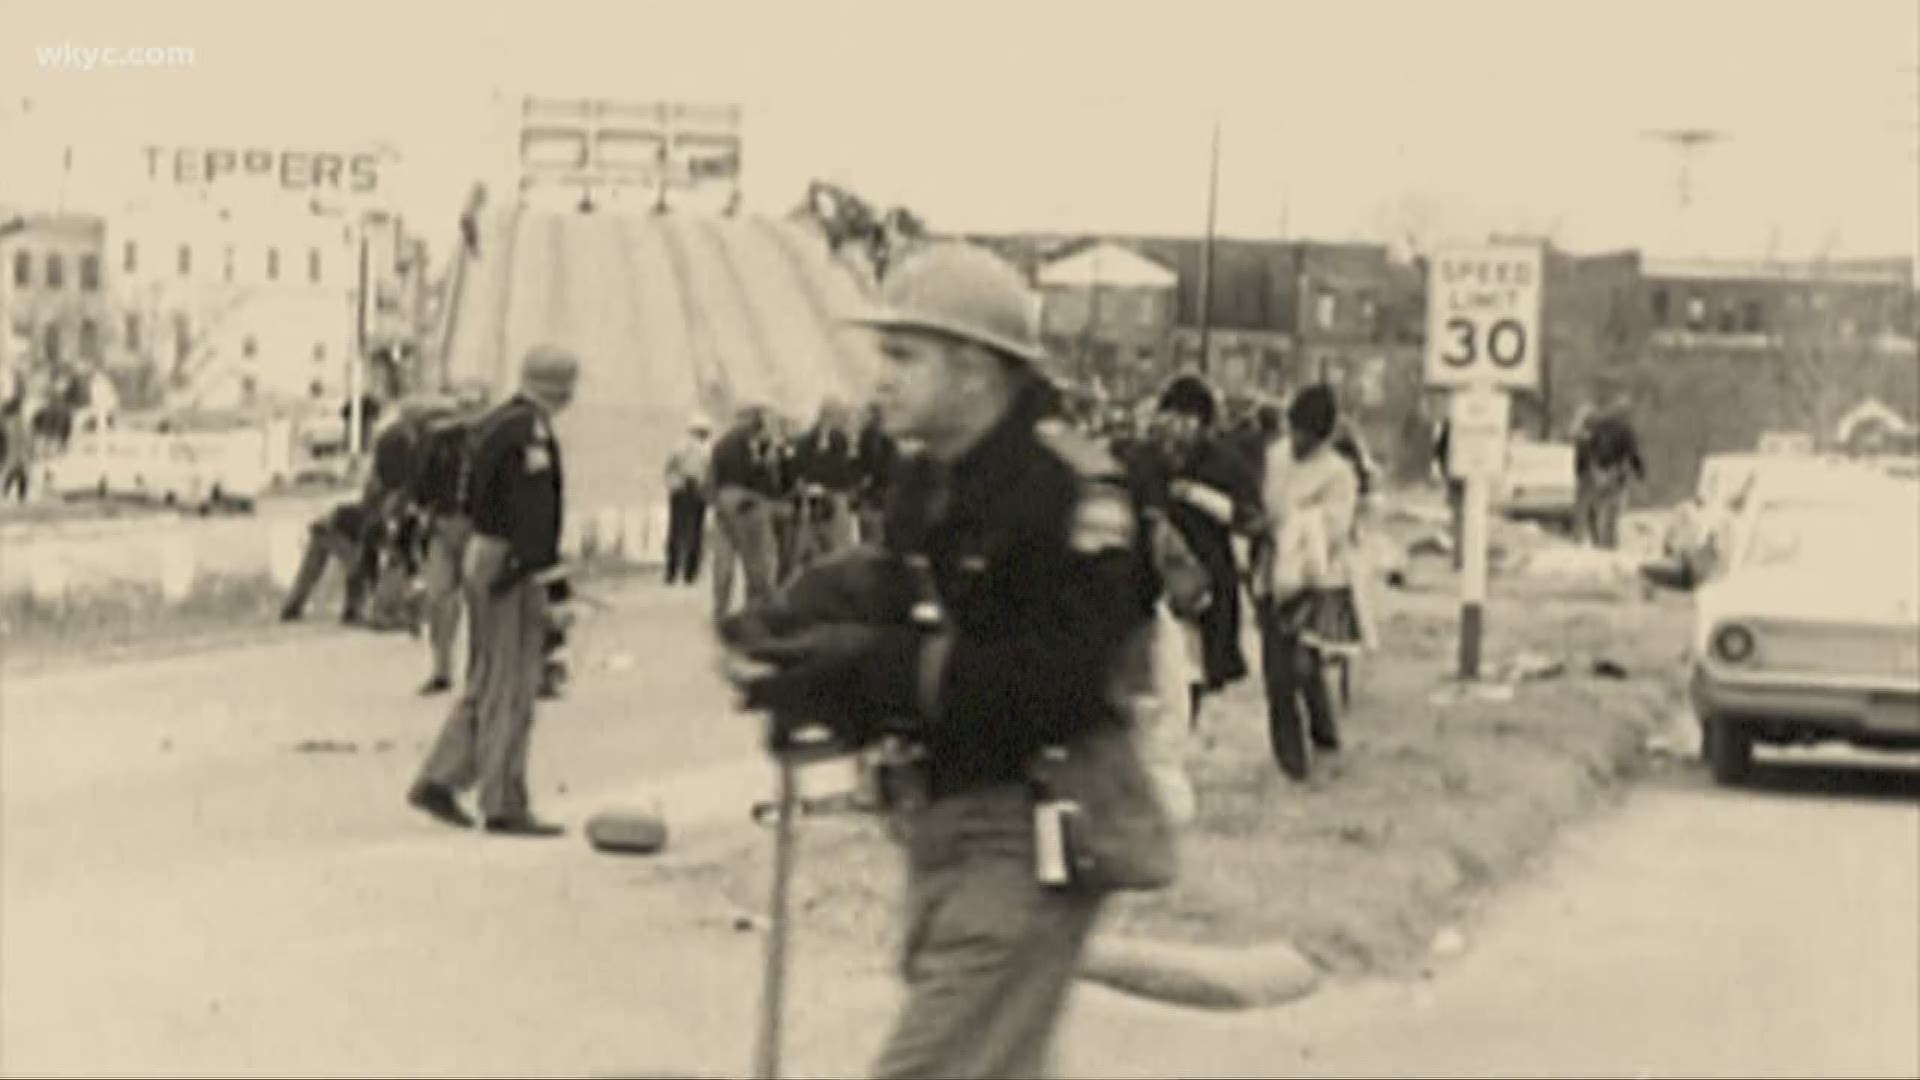 Part 3 of "50 years later: How race and rebellion sparked the Glenville shootout"